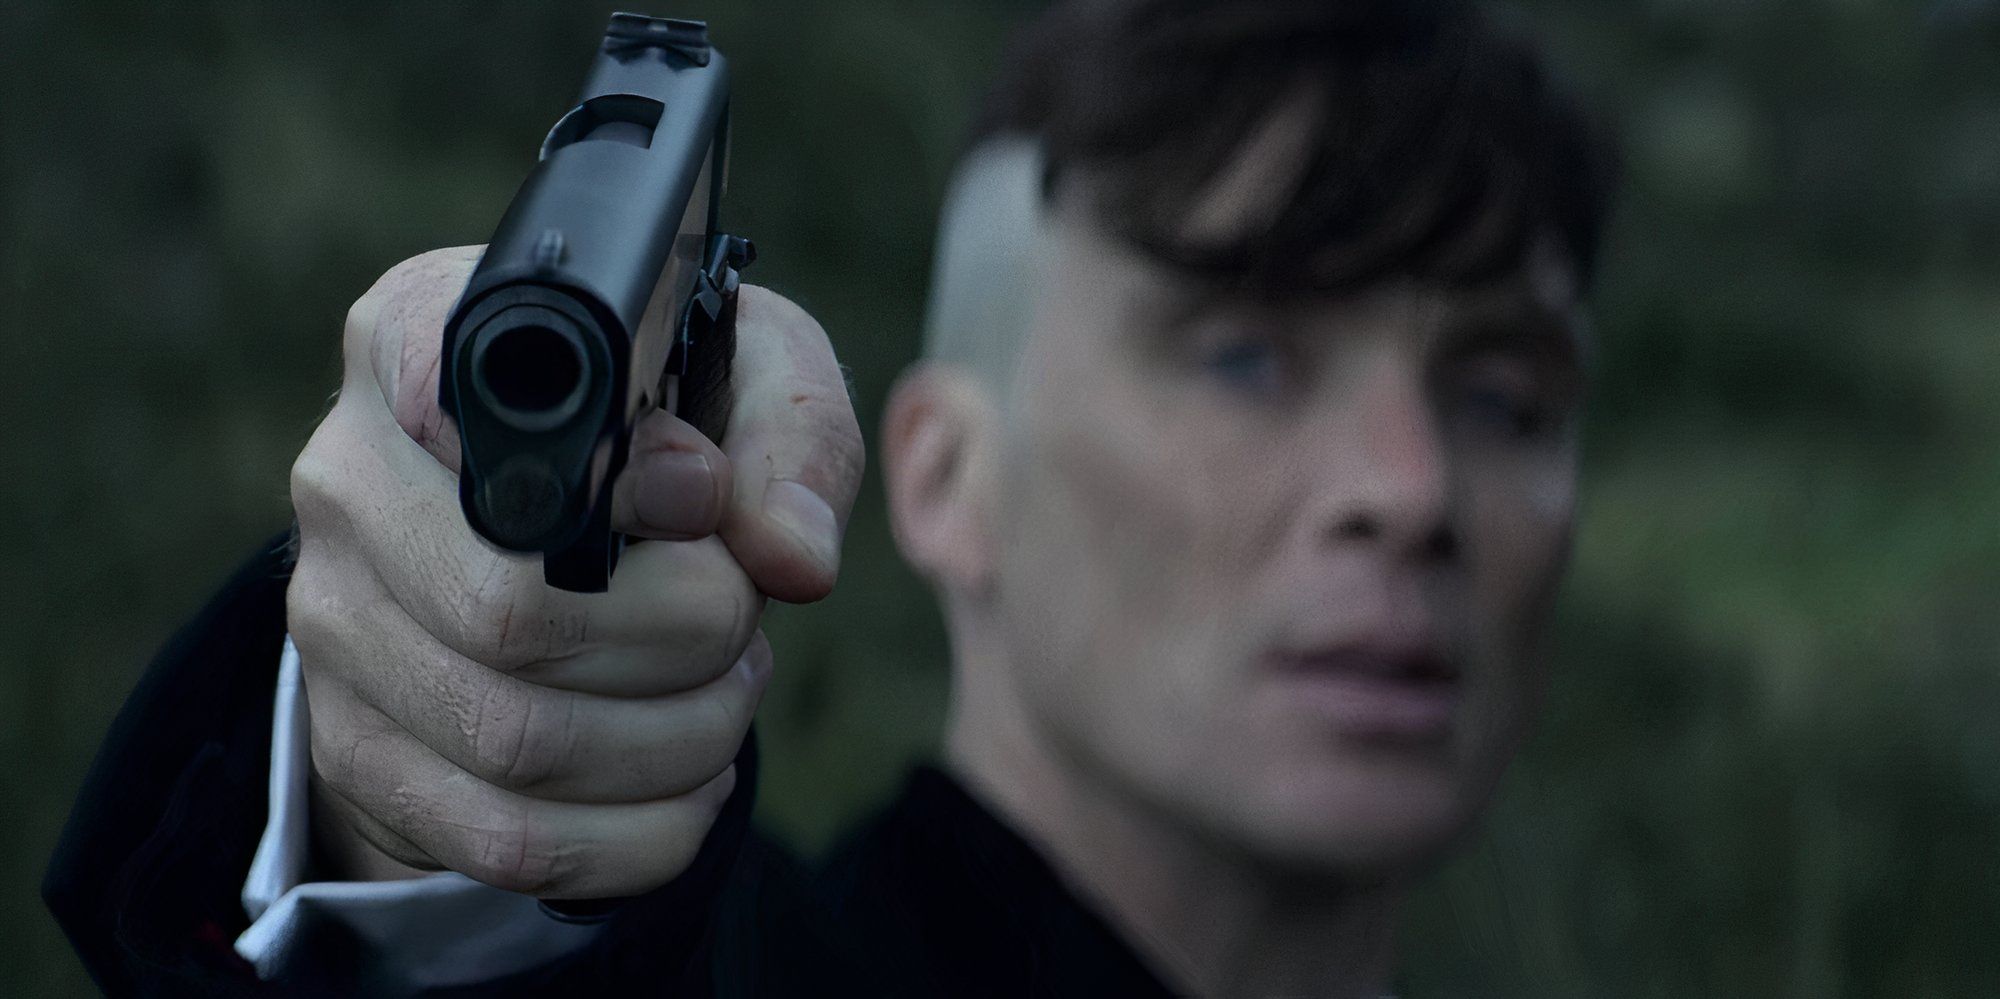 Cillian Murphy as Tommy Shelby pointing a gun at the camera in Peaky Blinders.